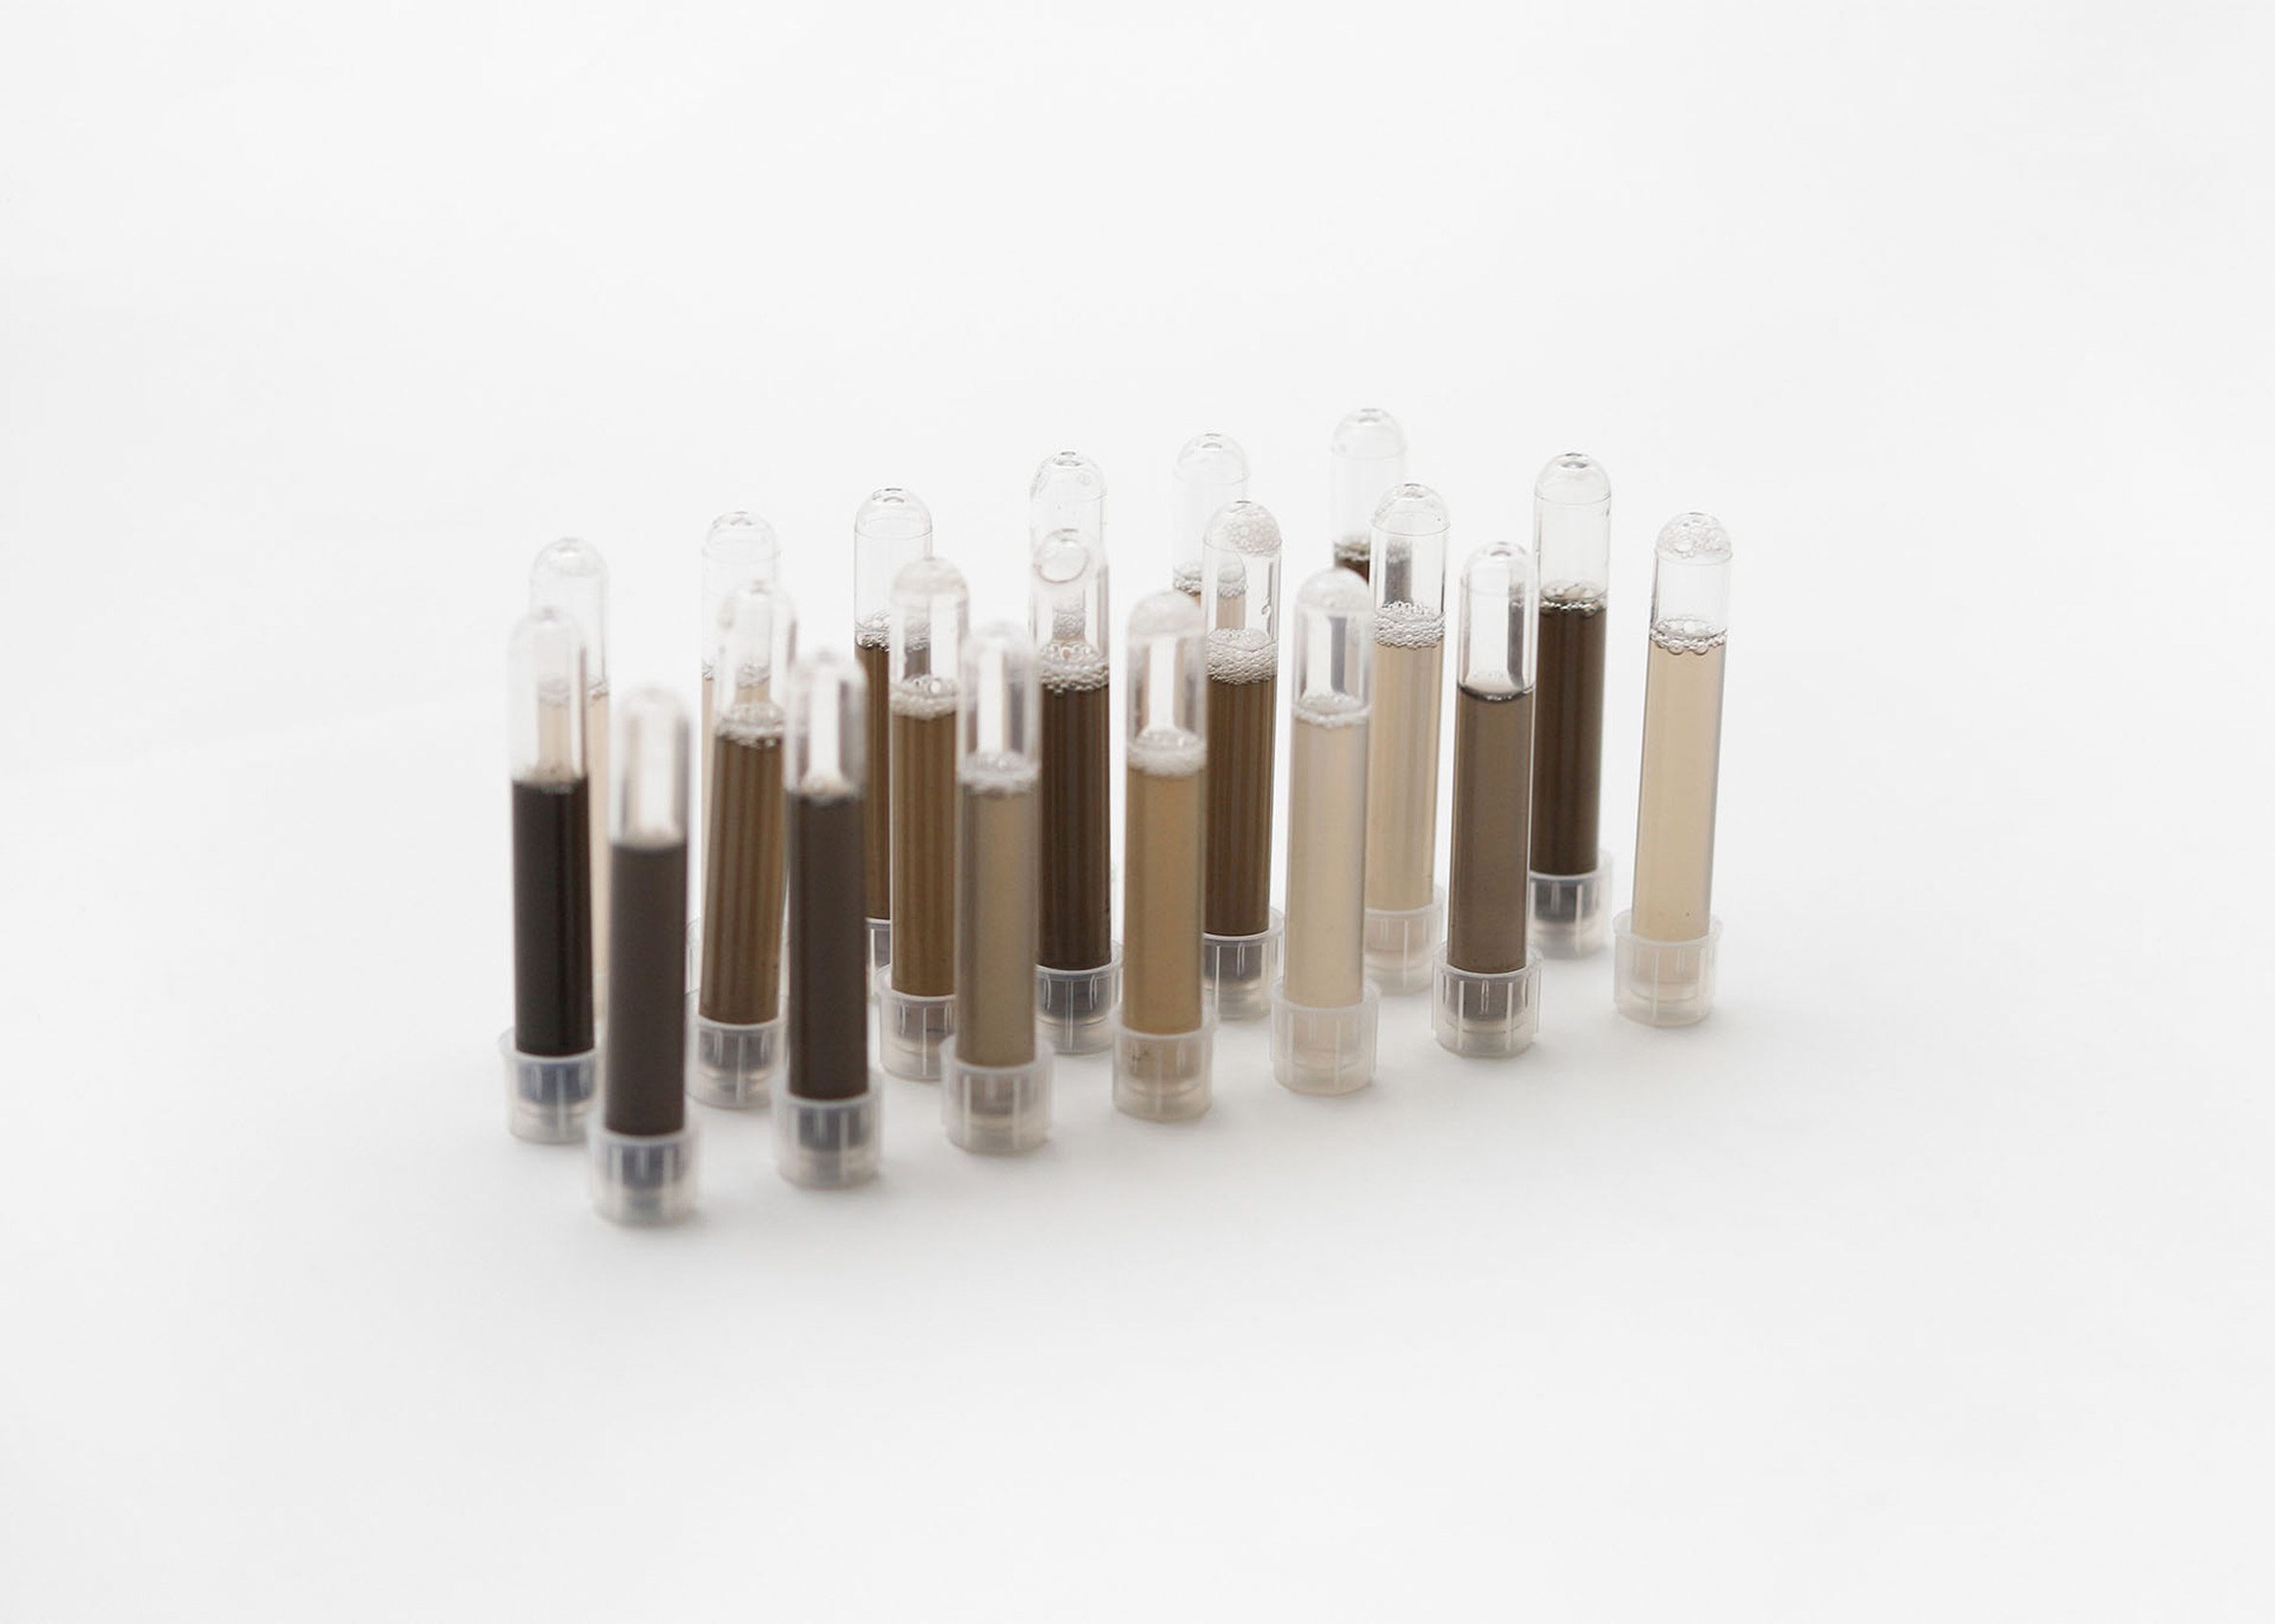 Photo of a tray of test tubes containing skin-coloured liquids from light beige to dark brown